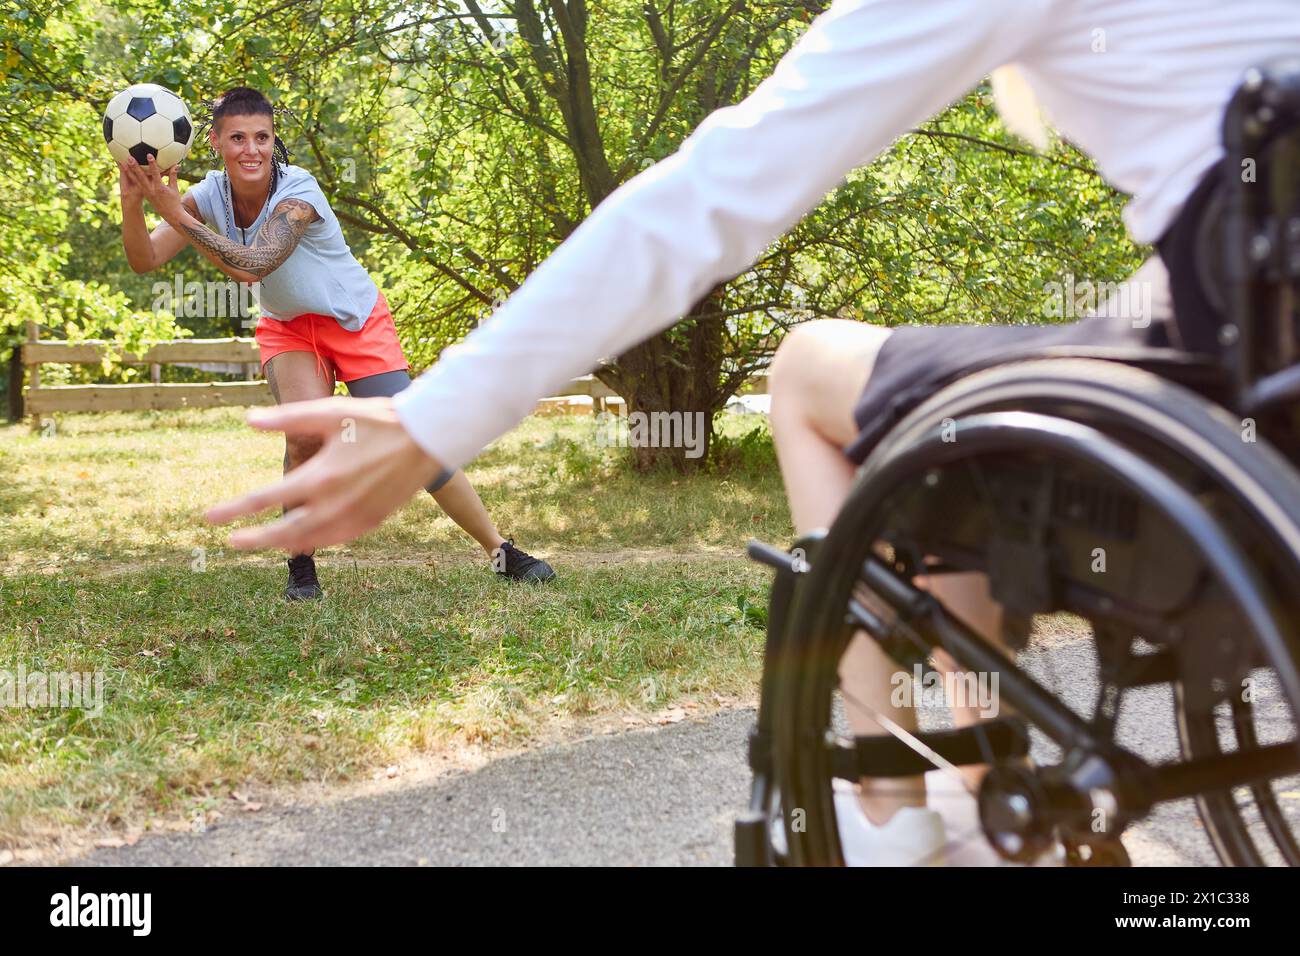 An inclusive outdoor scene where a person using a wheelchair is participating in a game of soccer with a standing person. Stock Photo